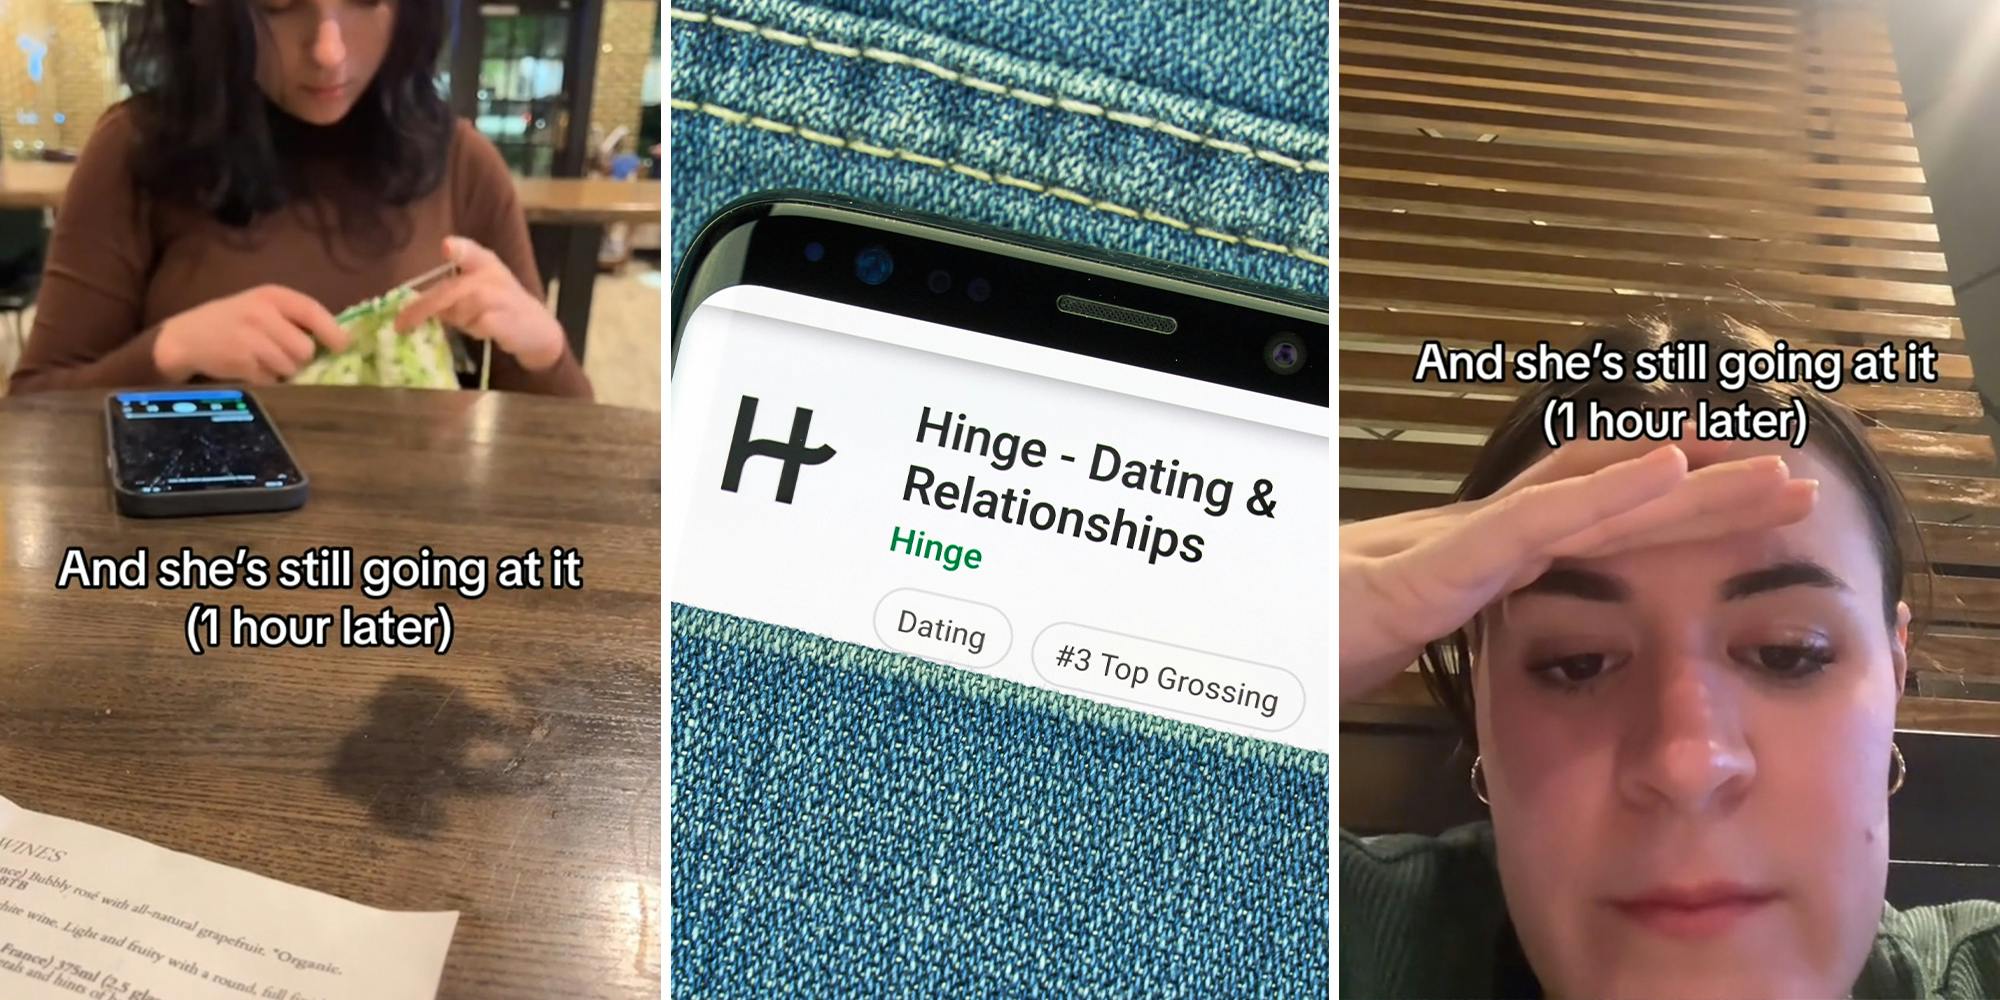 oman says first Hinge date started silently crocheting